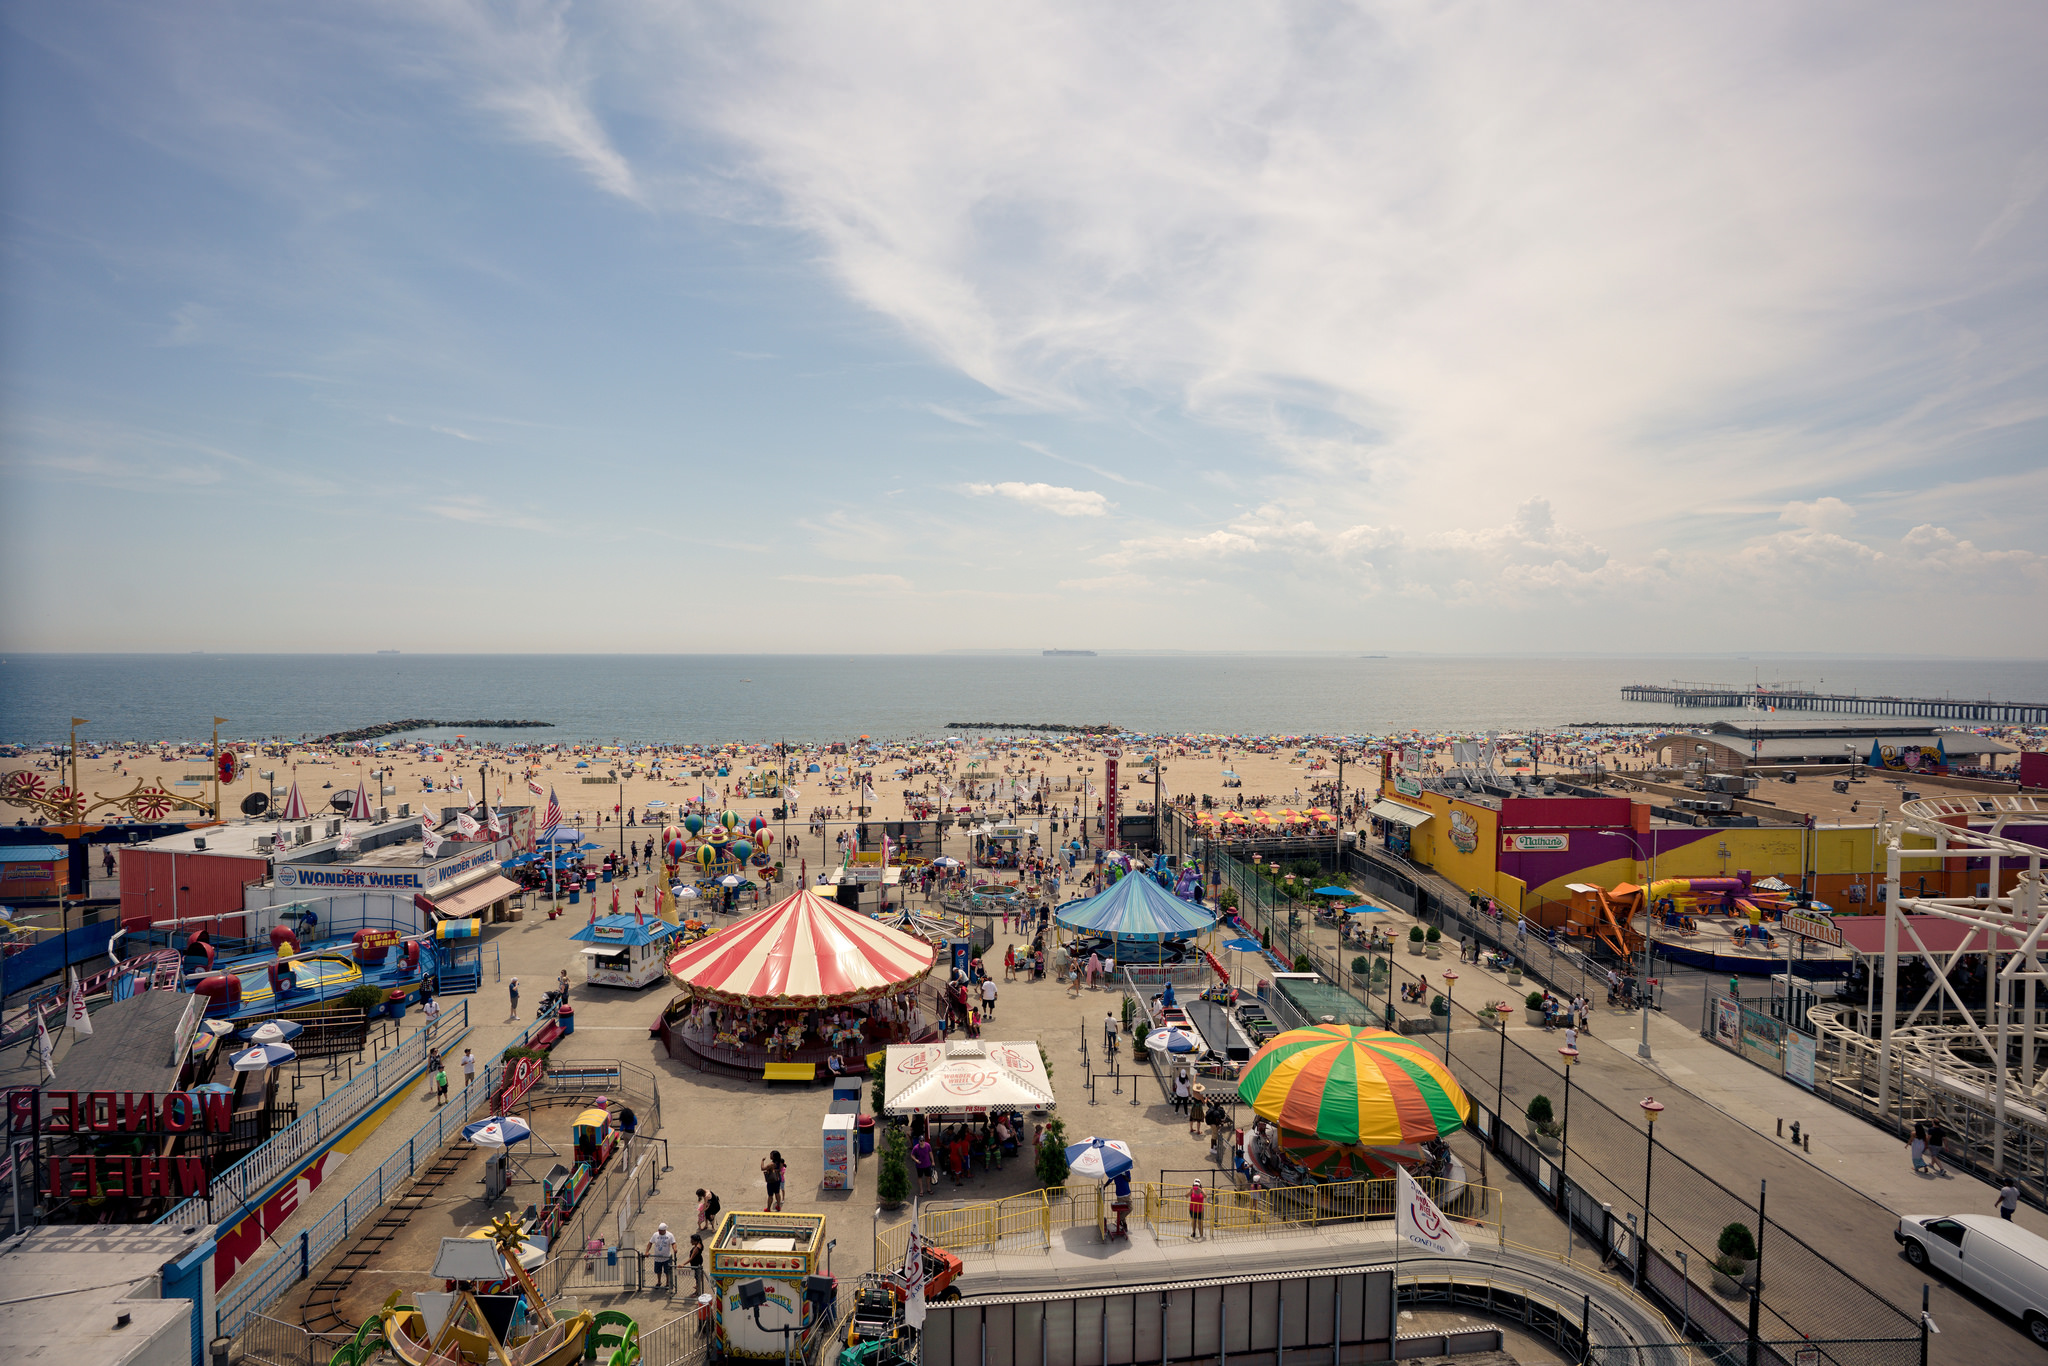 (Sony ILCE-7RM2 + Zeiss Batis 18mm f/2.8) ISO 100 - A view of Coney Island at 18mm from the top of the Wonder Wheel